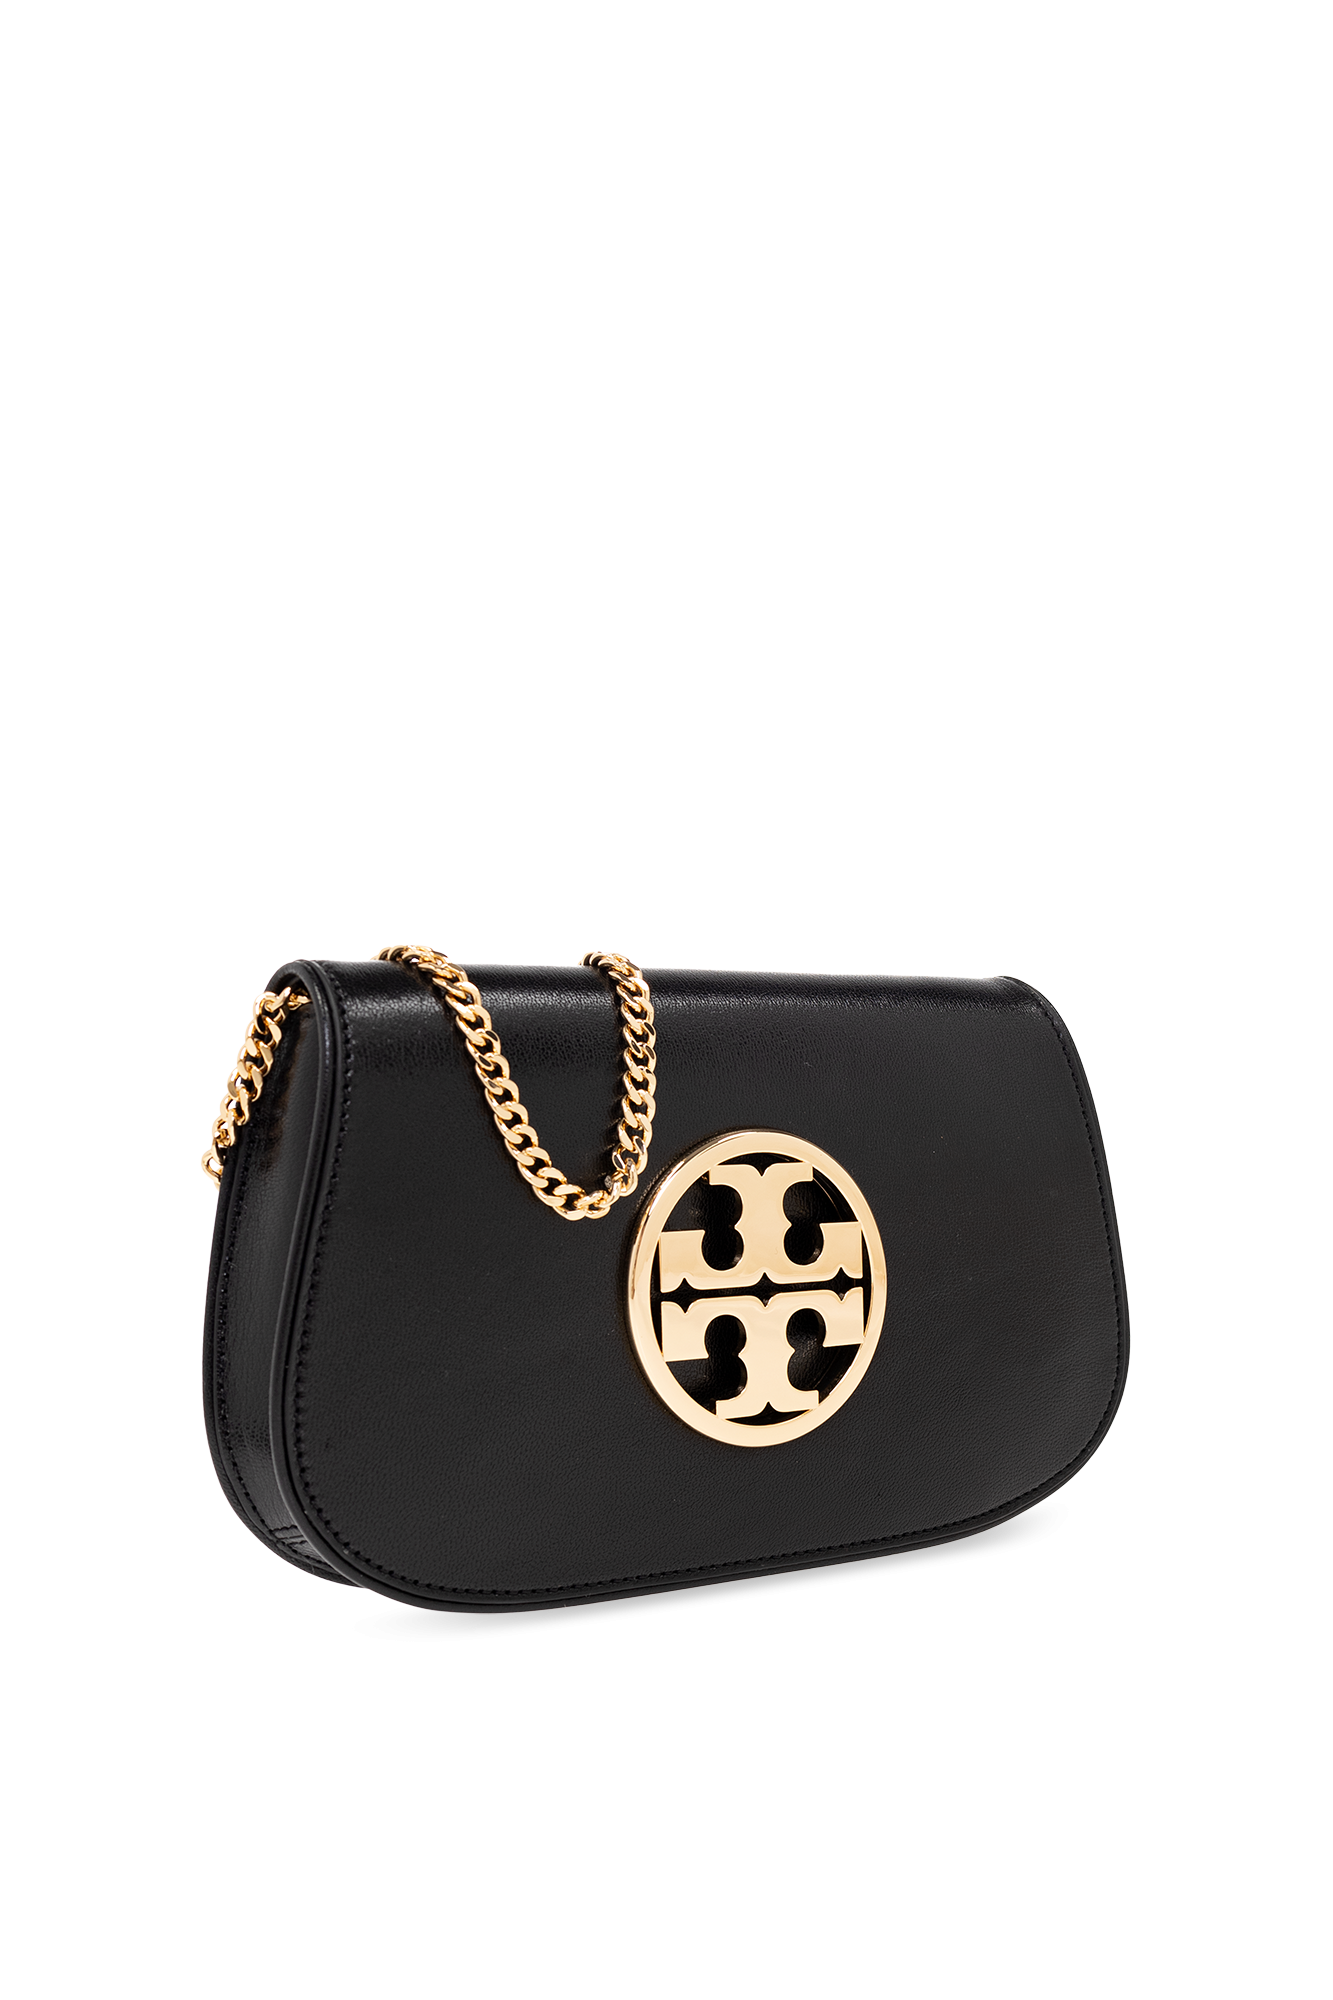 Reva Small Leather Shoulder Bag in Red - Tory Burch